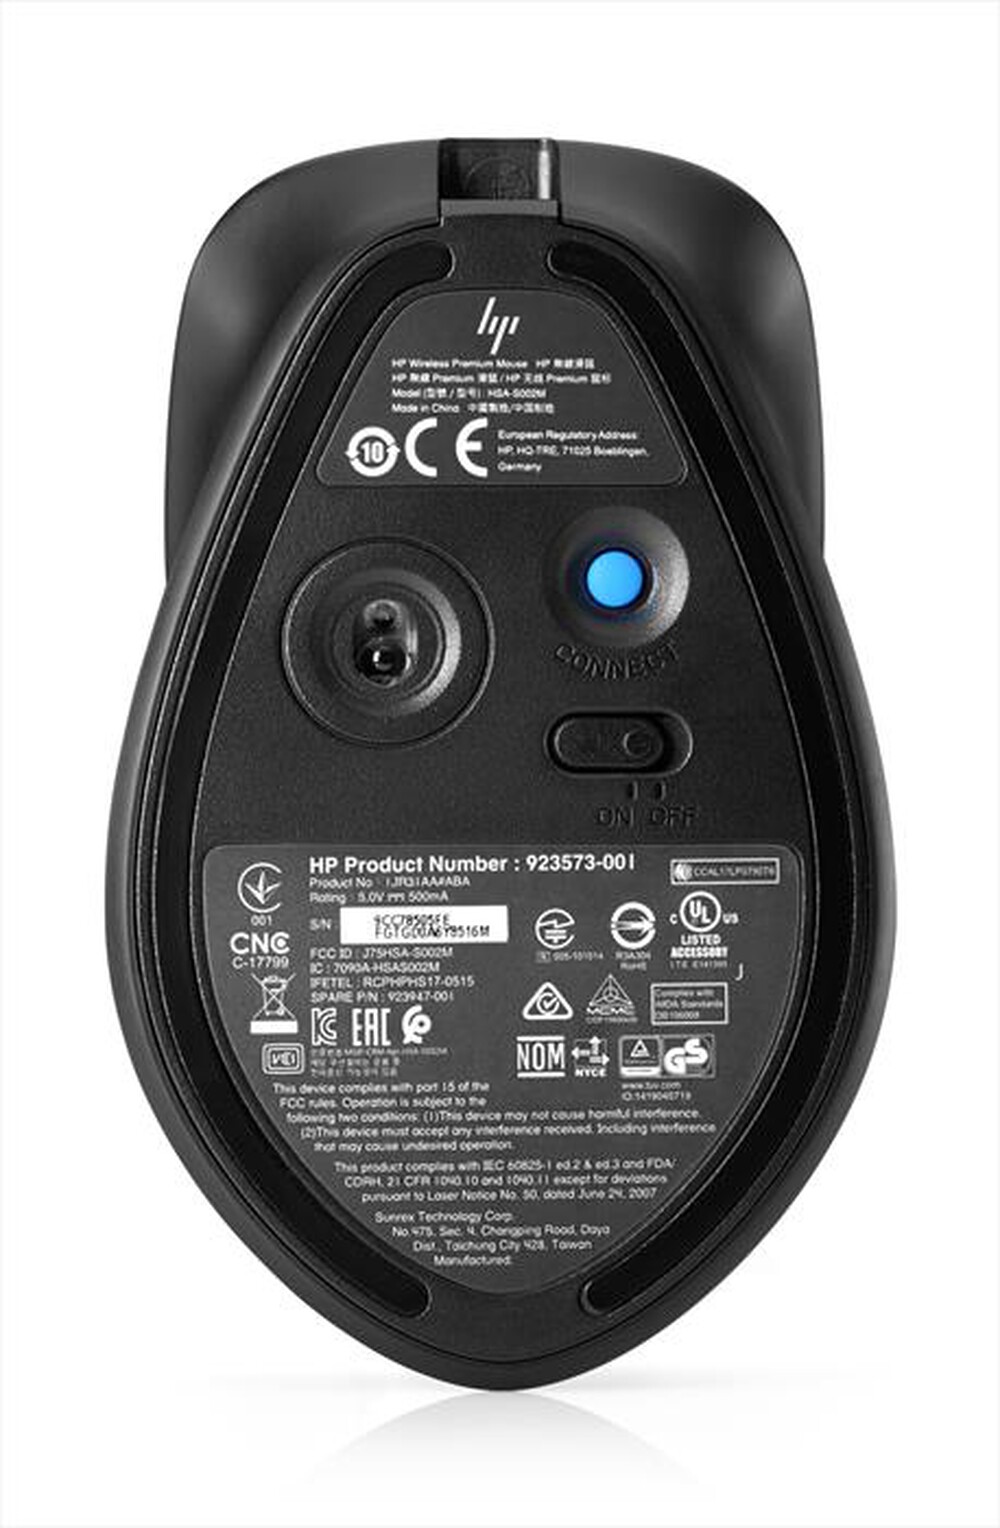 "HP - MOUSE HP ENVY 500-Silver"